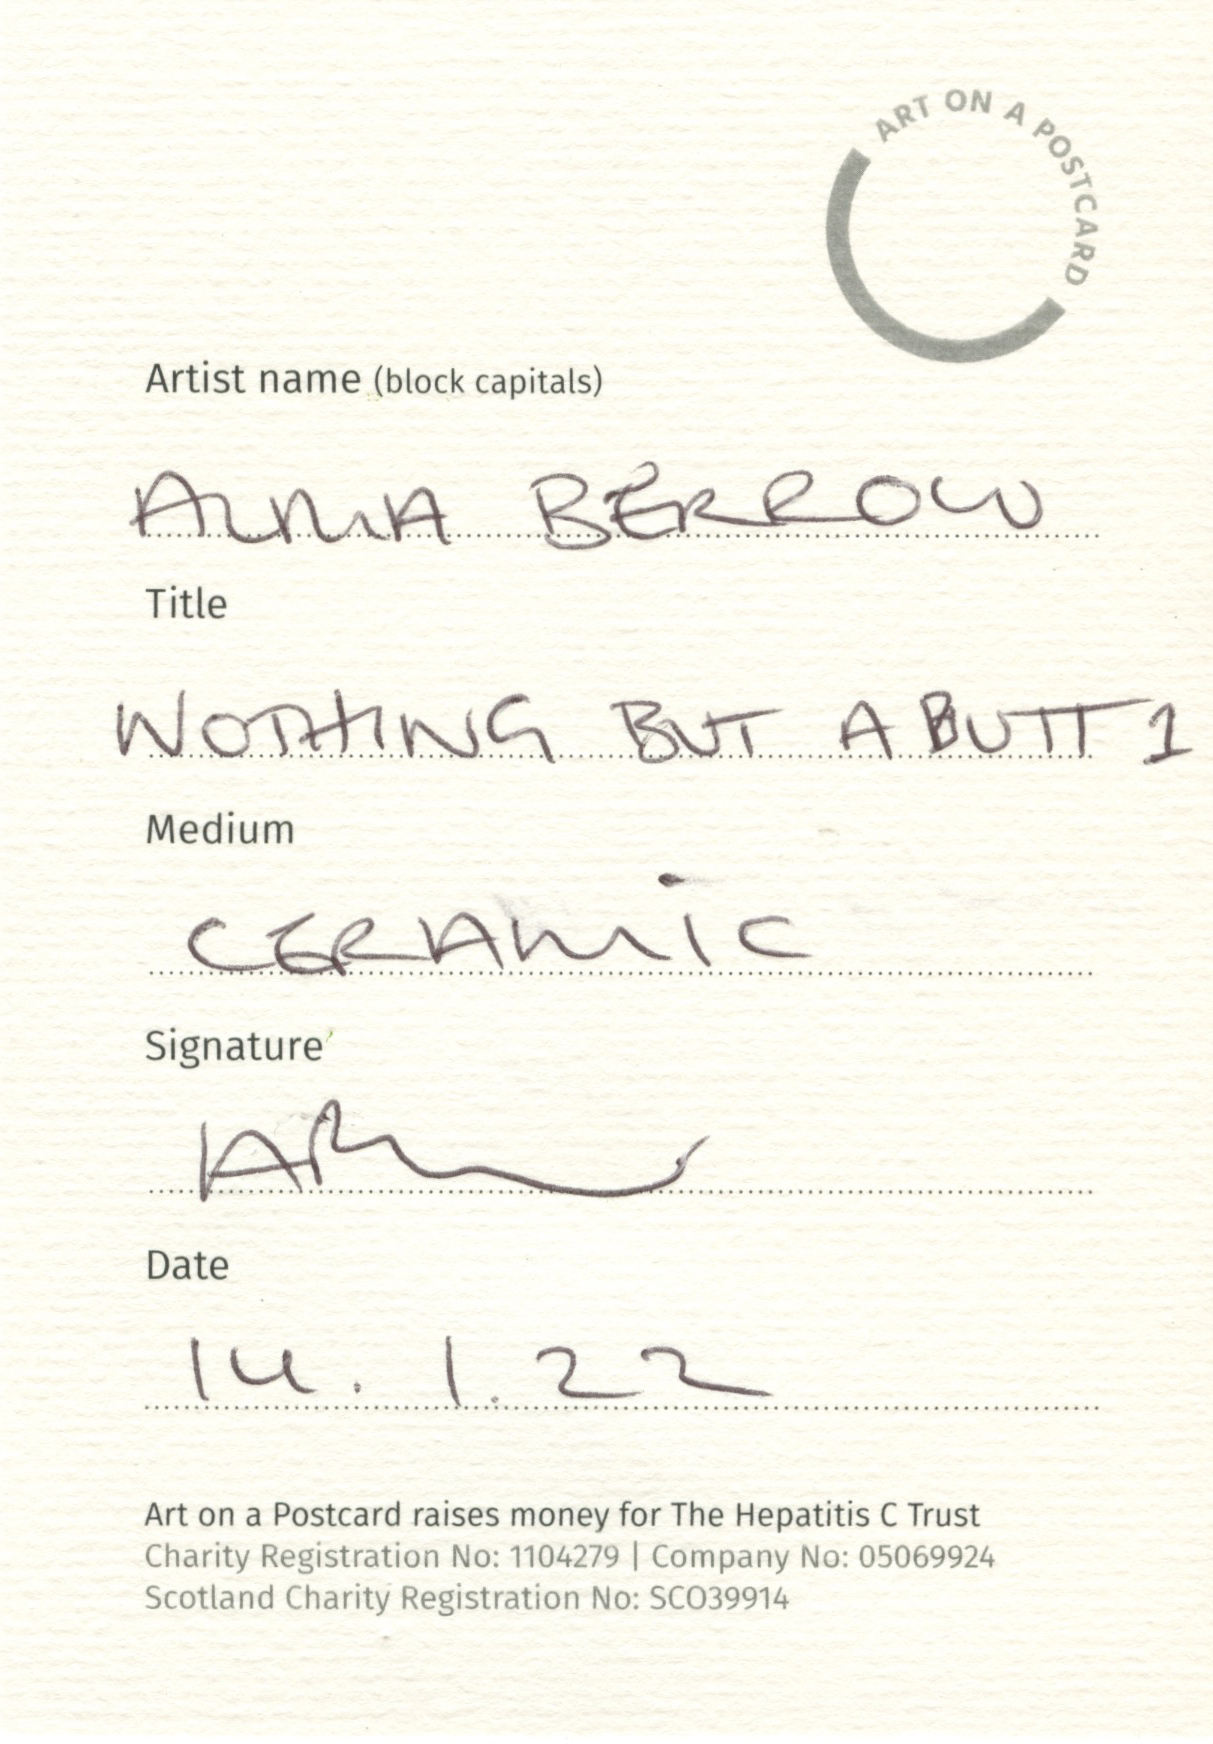 23. Alma Berrow - Nothing But a Butt 1 - BACK1